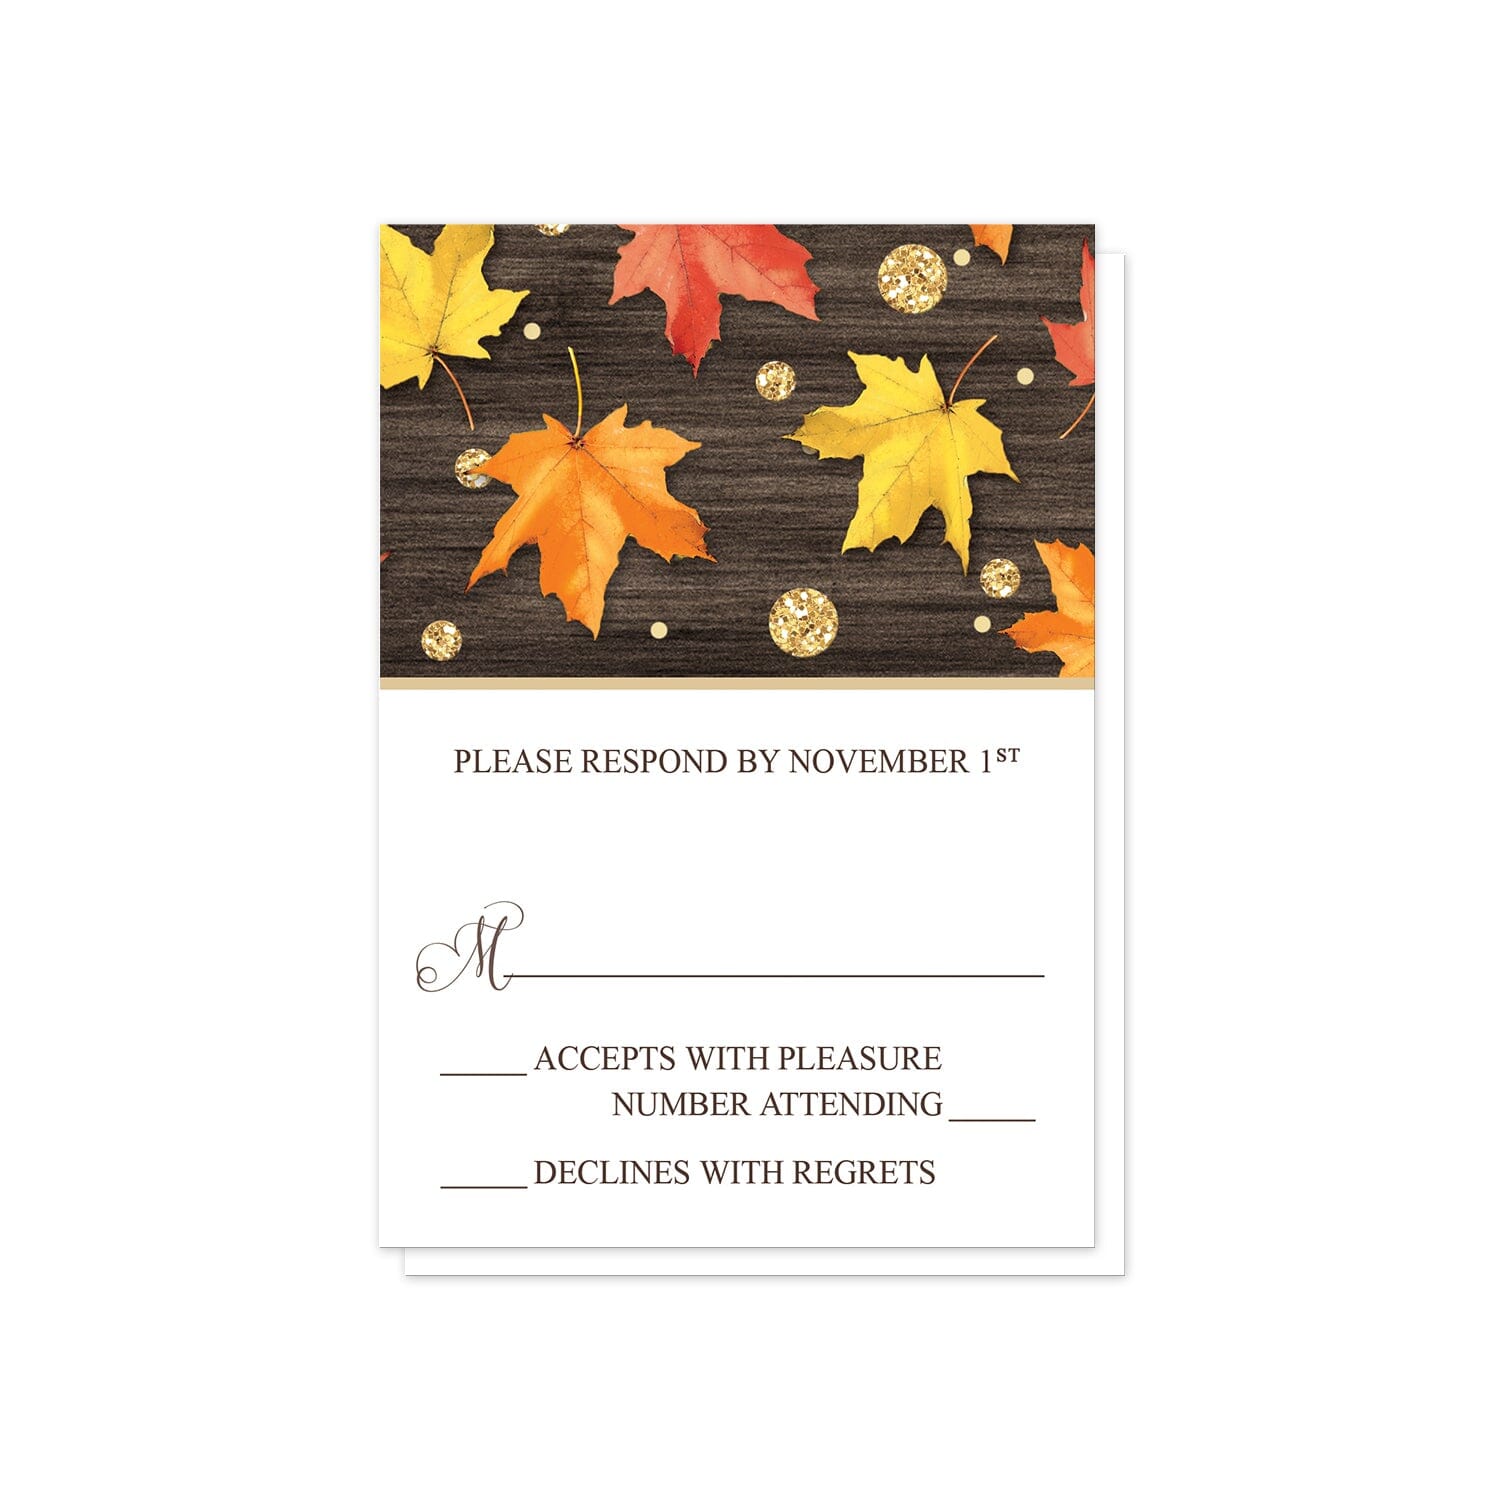 Falling Leaves with Gold Autumn RSVP Cards at Artistically Invited.